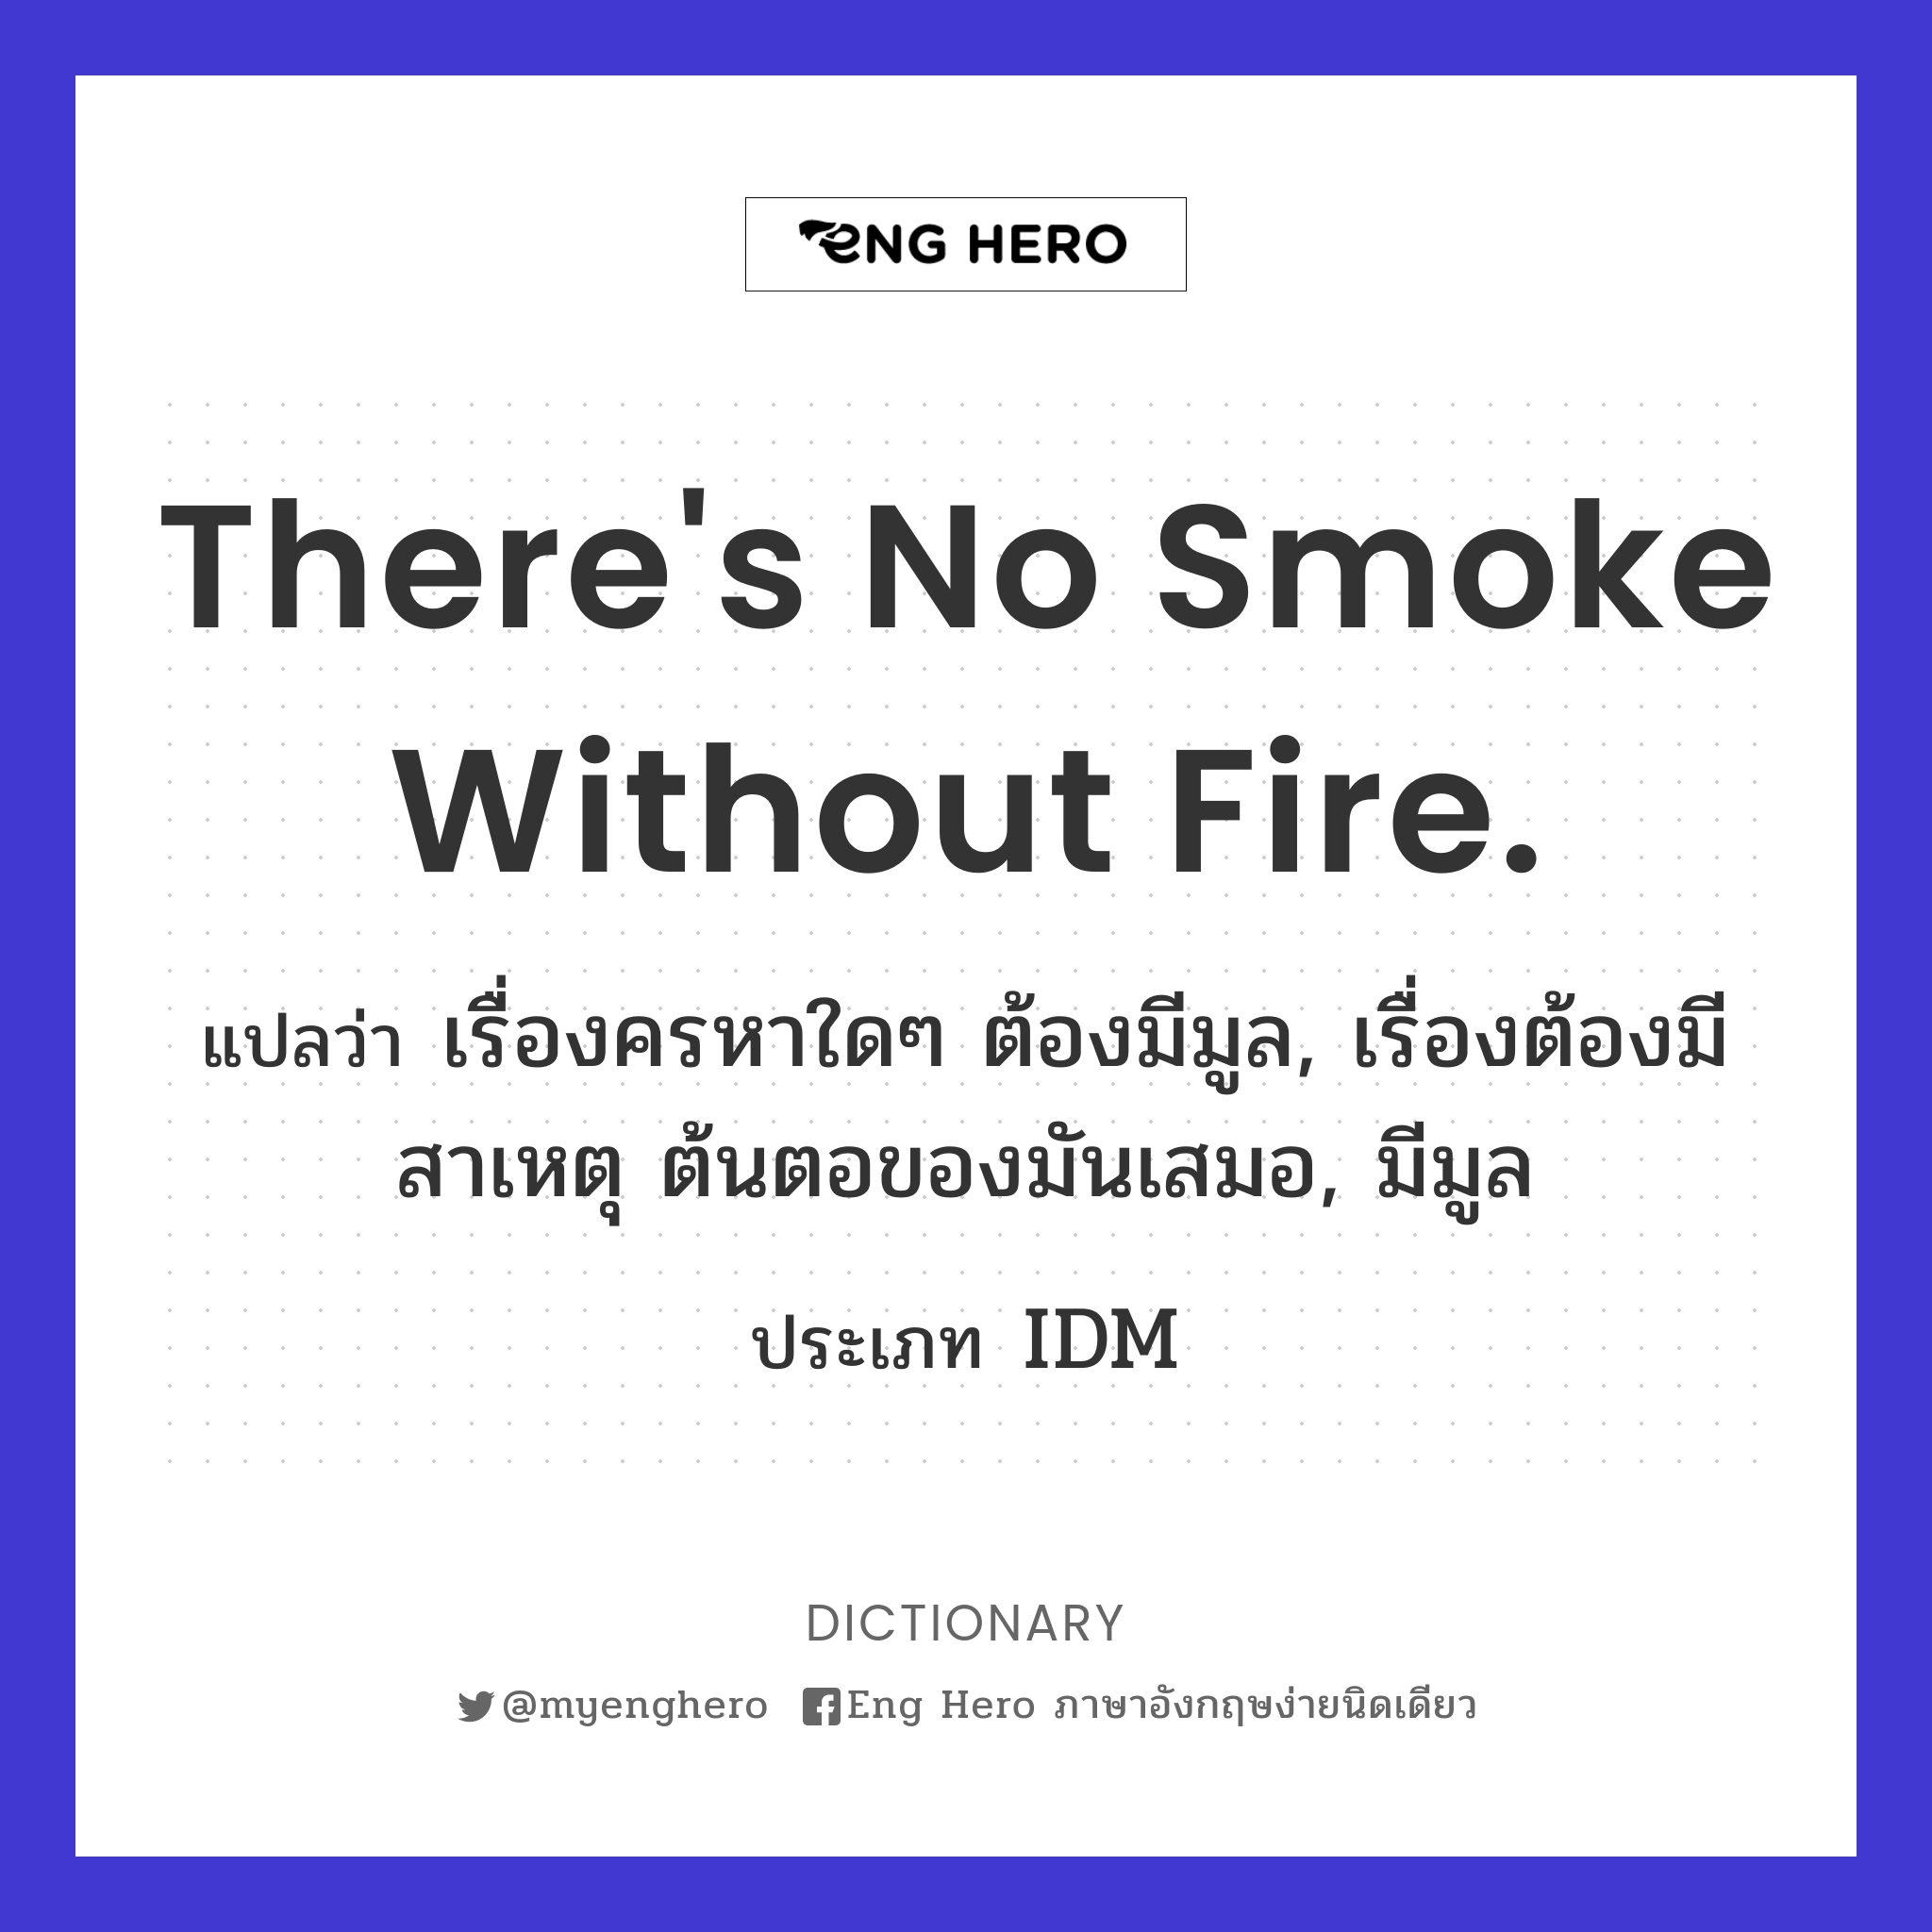 There's no smoke without fire.